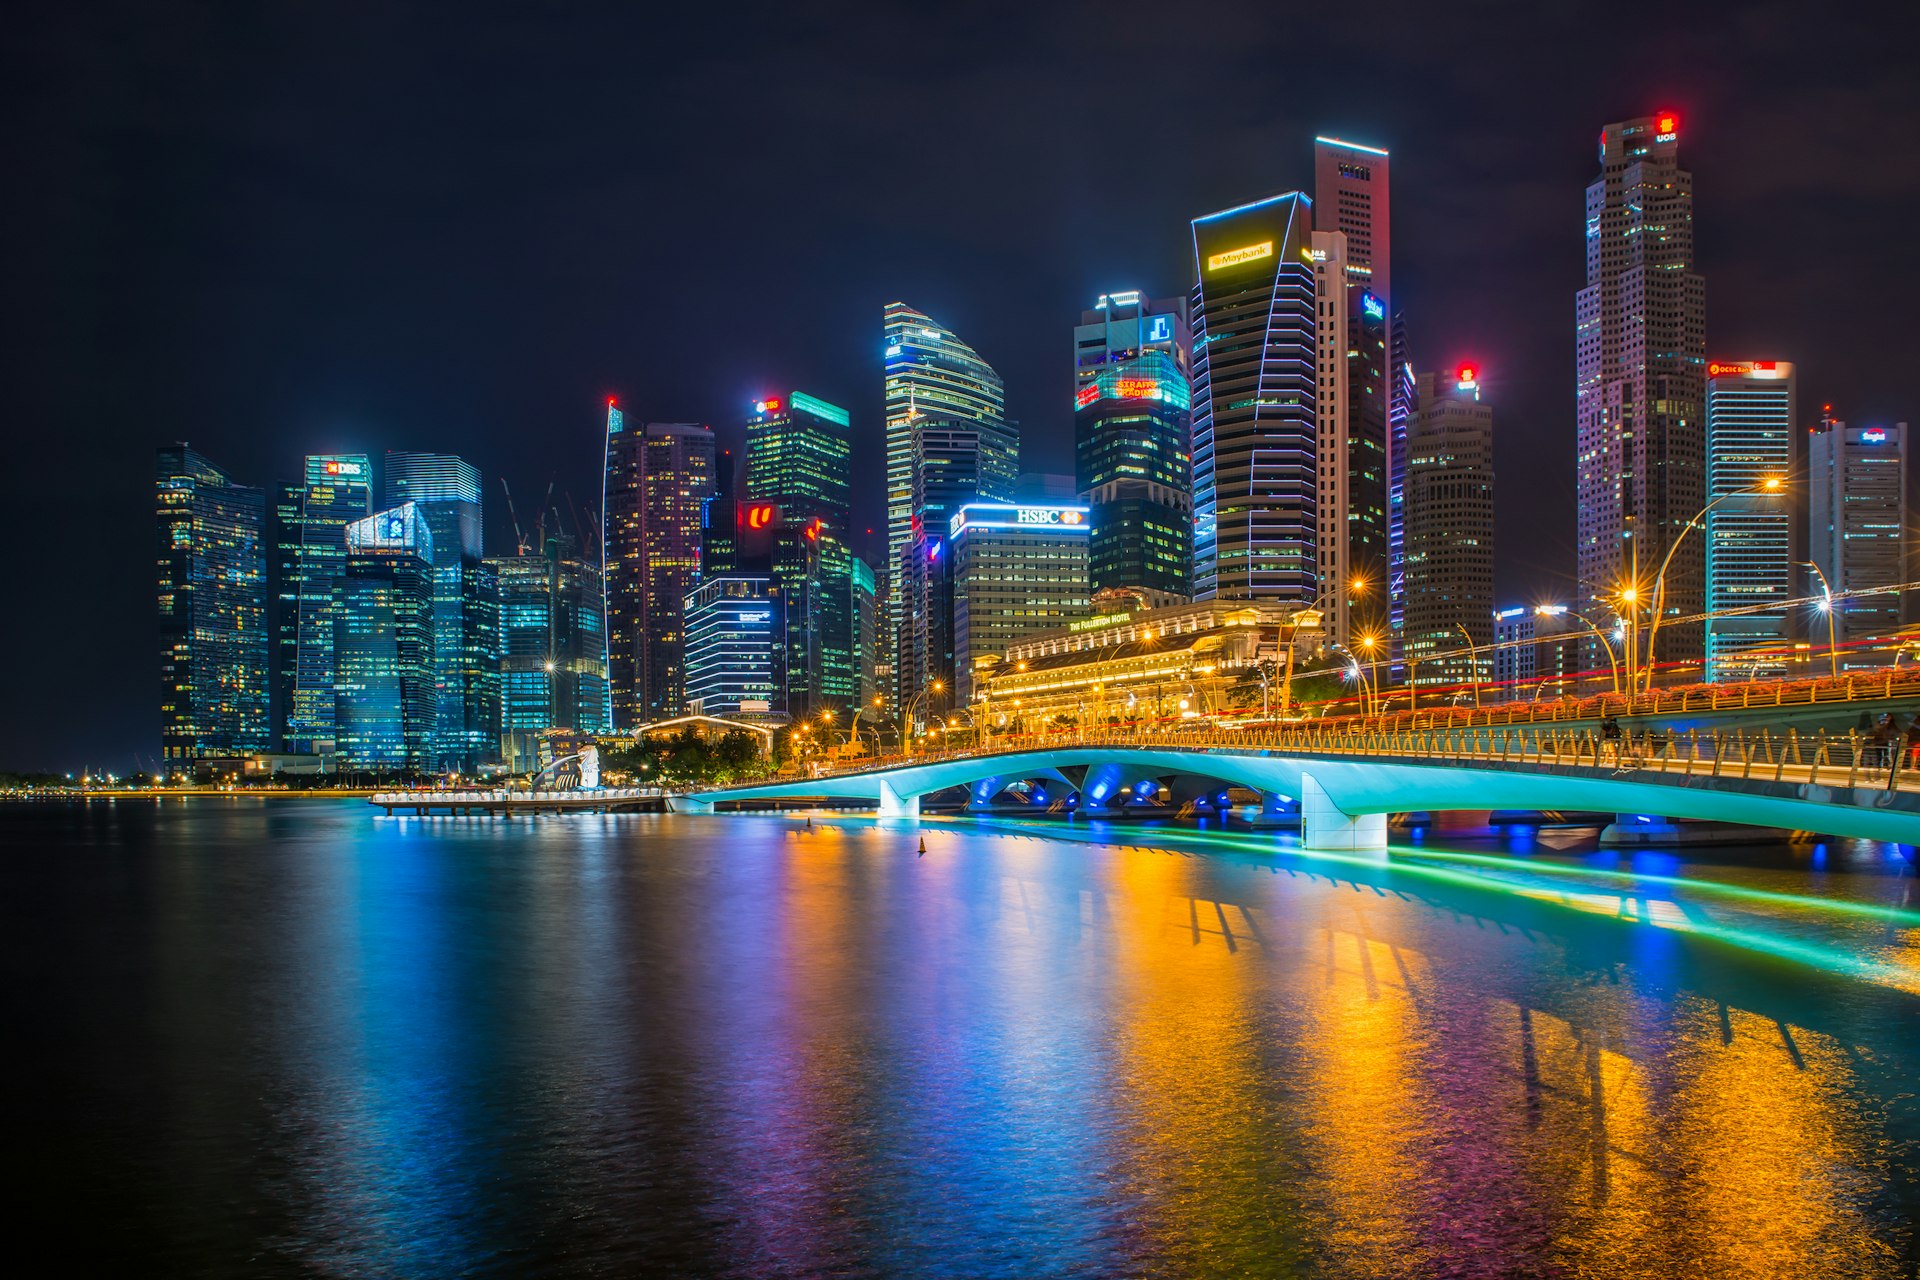 Features - Singapore skyline at night